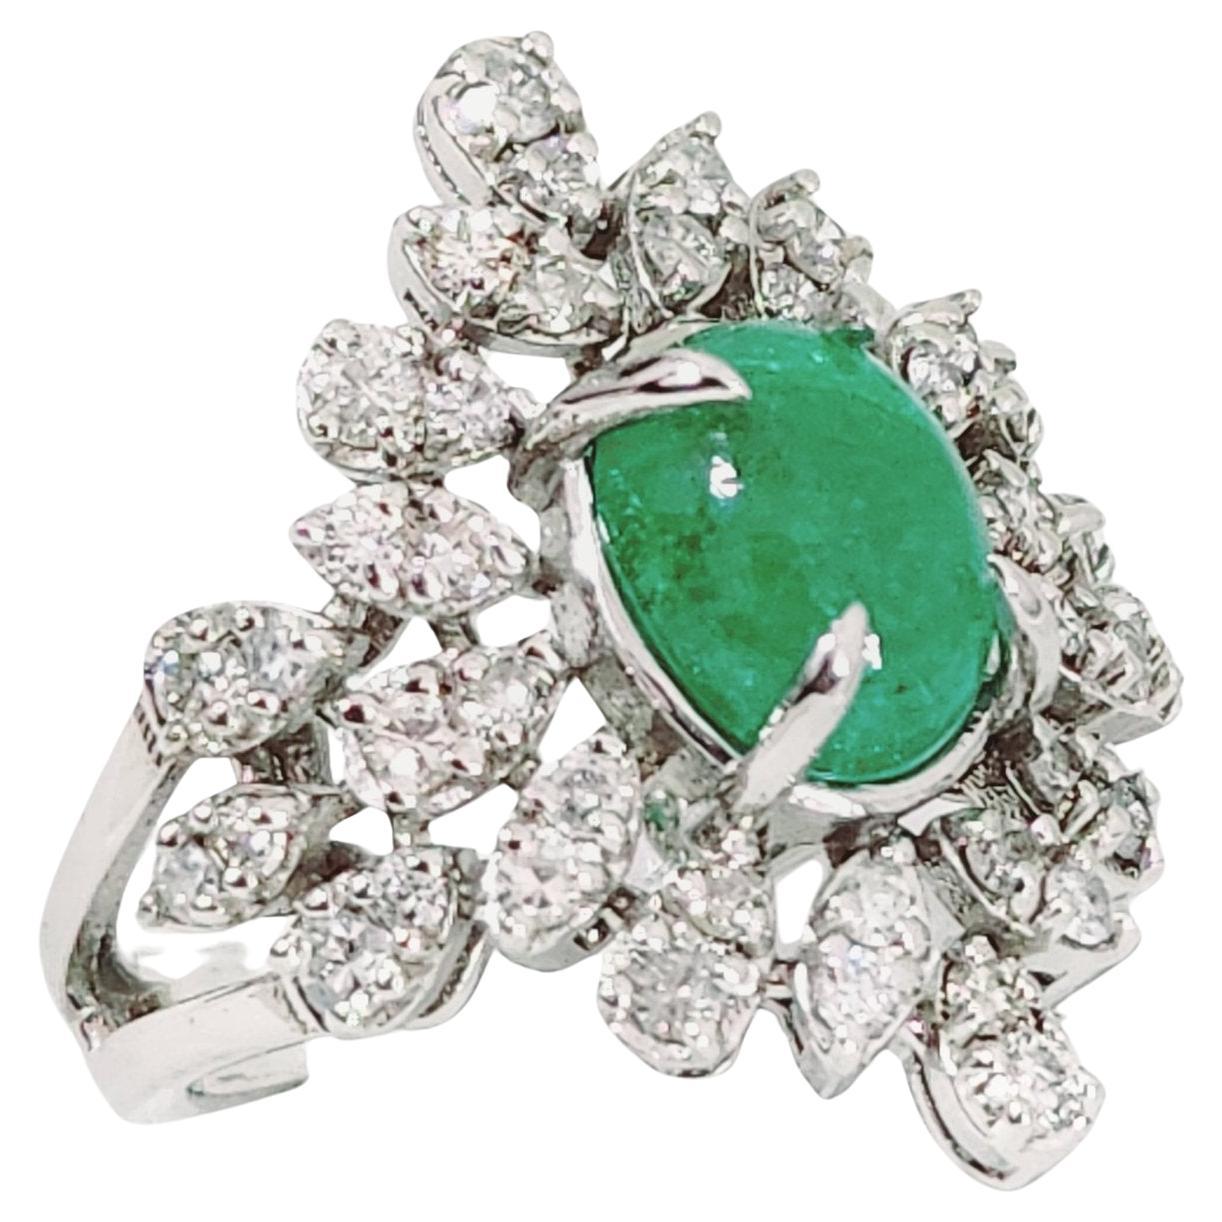 2.18 ct Cabochon Emerald Ring For Sale